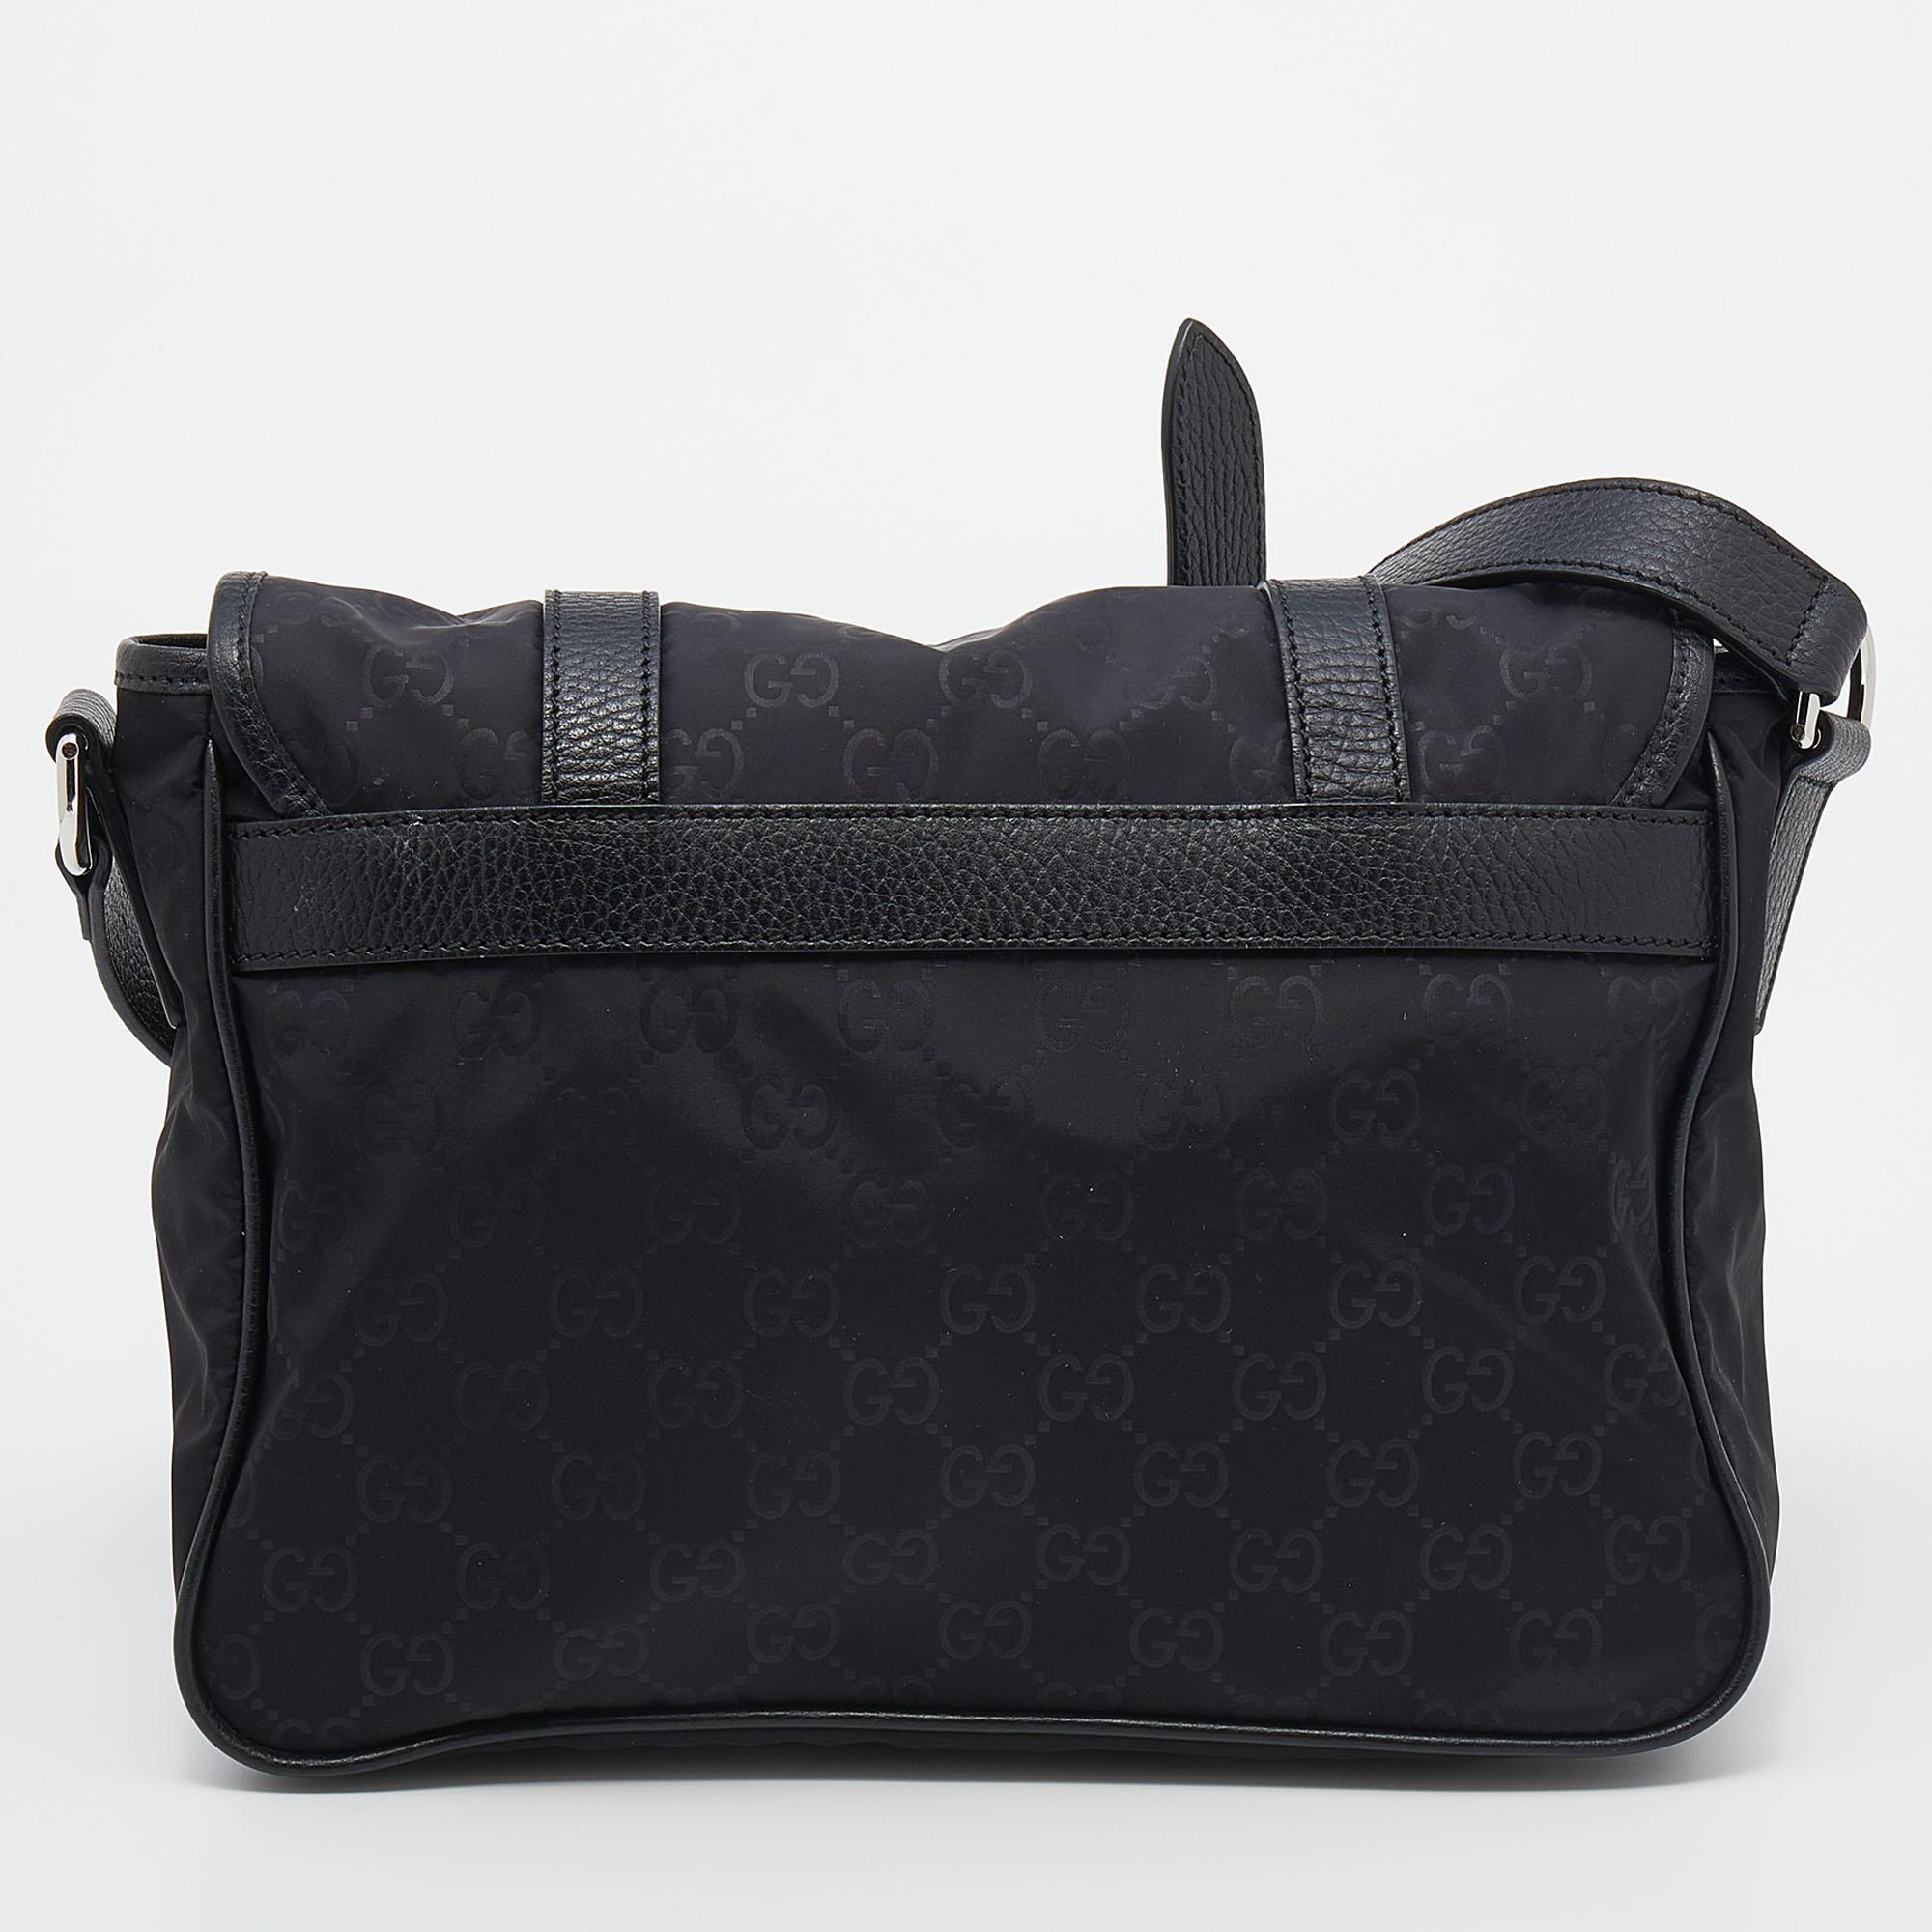 This messenger bag from the House of Gucci is absolutely classy and practical! Made from black GG nylon and leather, this bag features a shoulder strap along with silver-tone hardware. It accommodates a roomy fabric-lined interior. Carry this Gucci